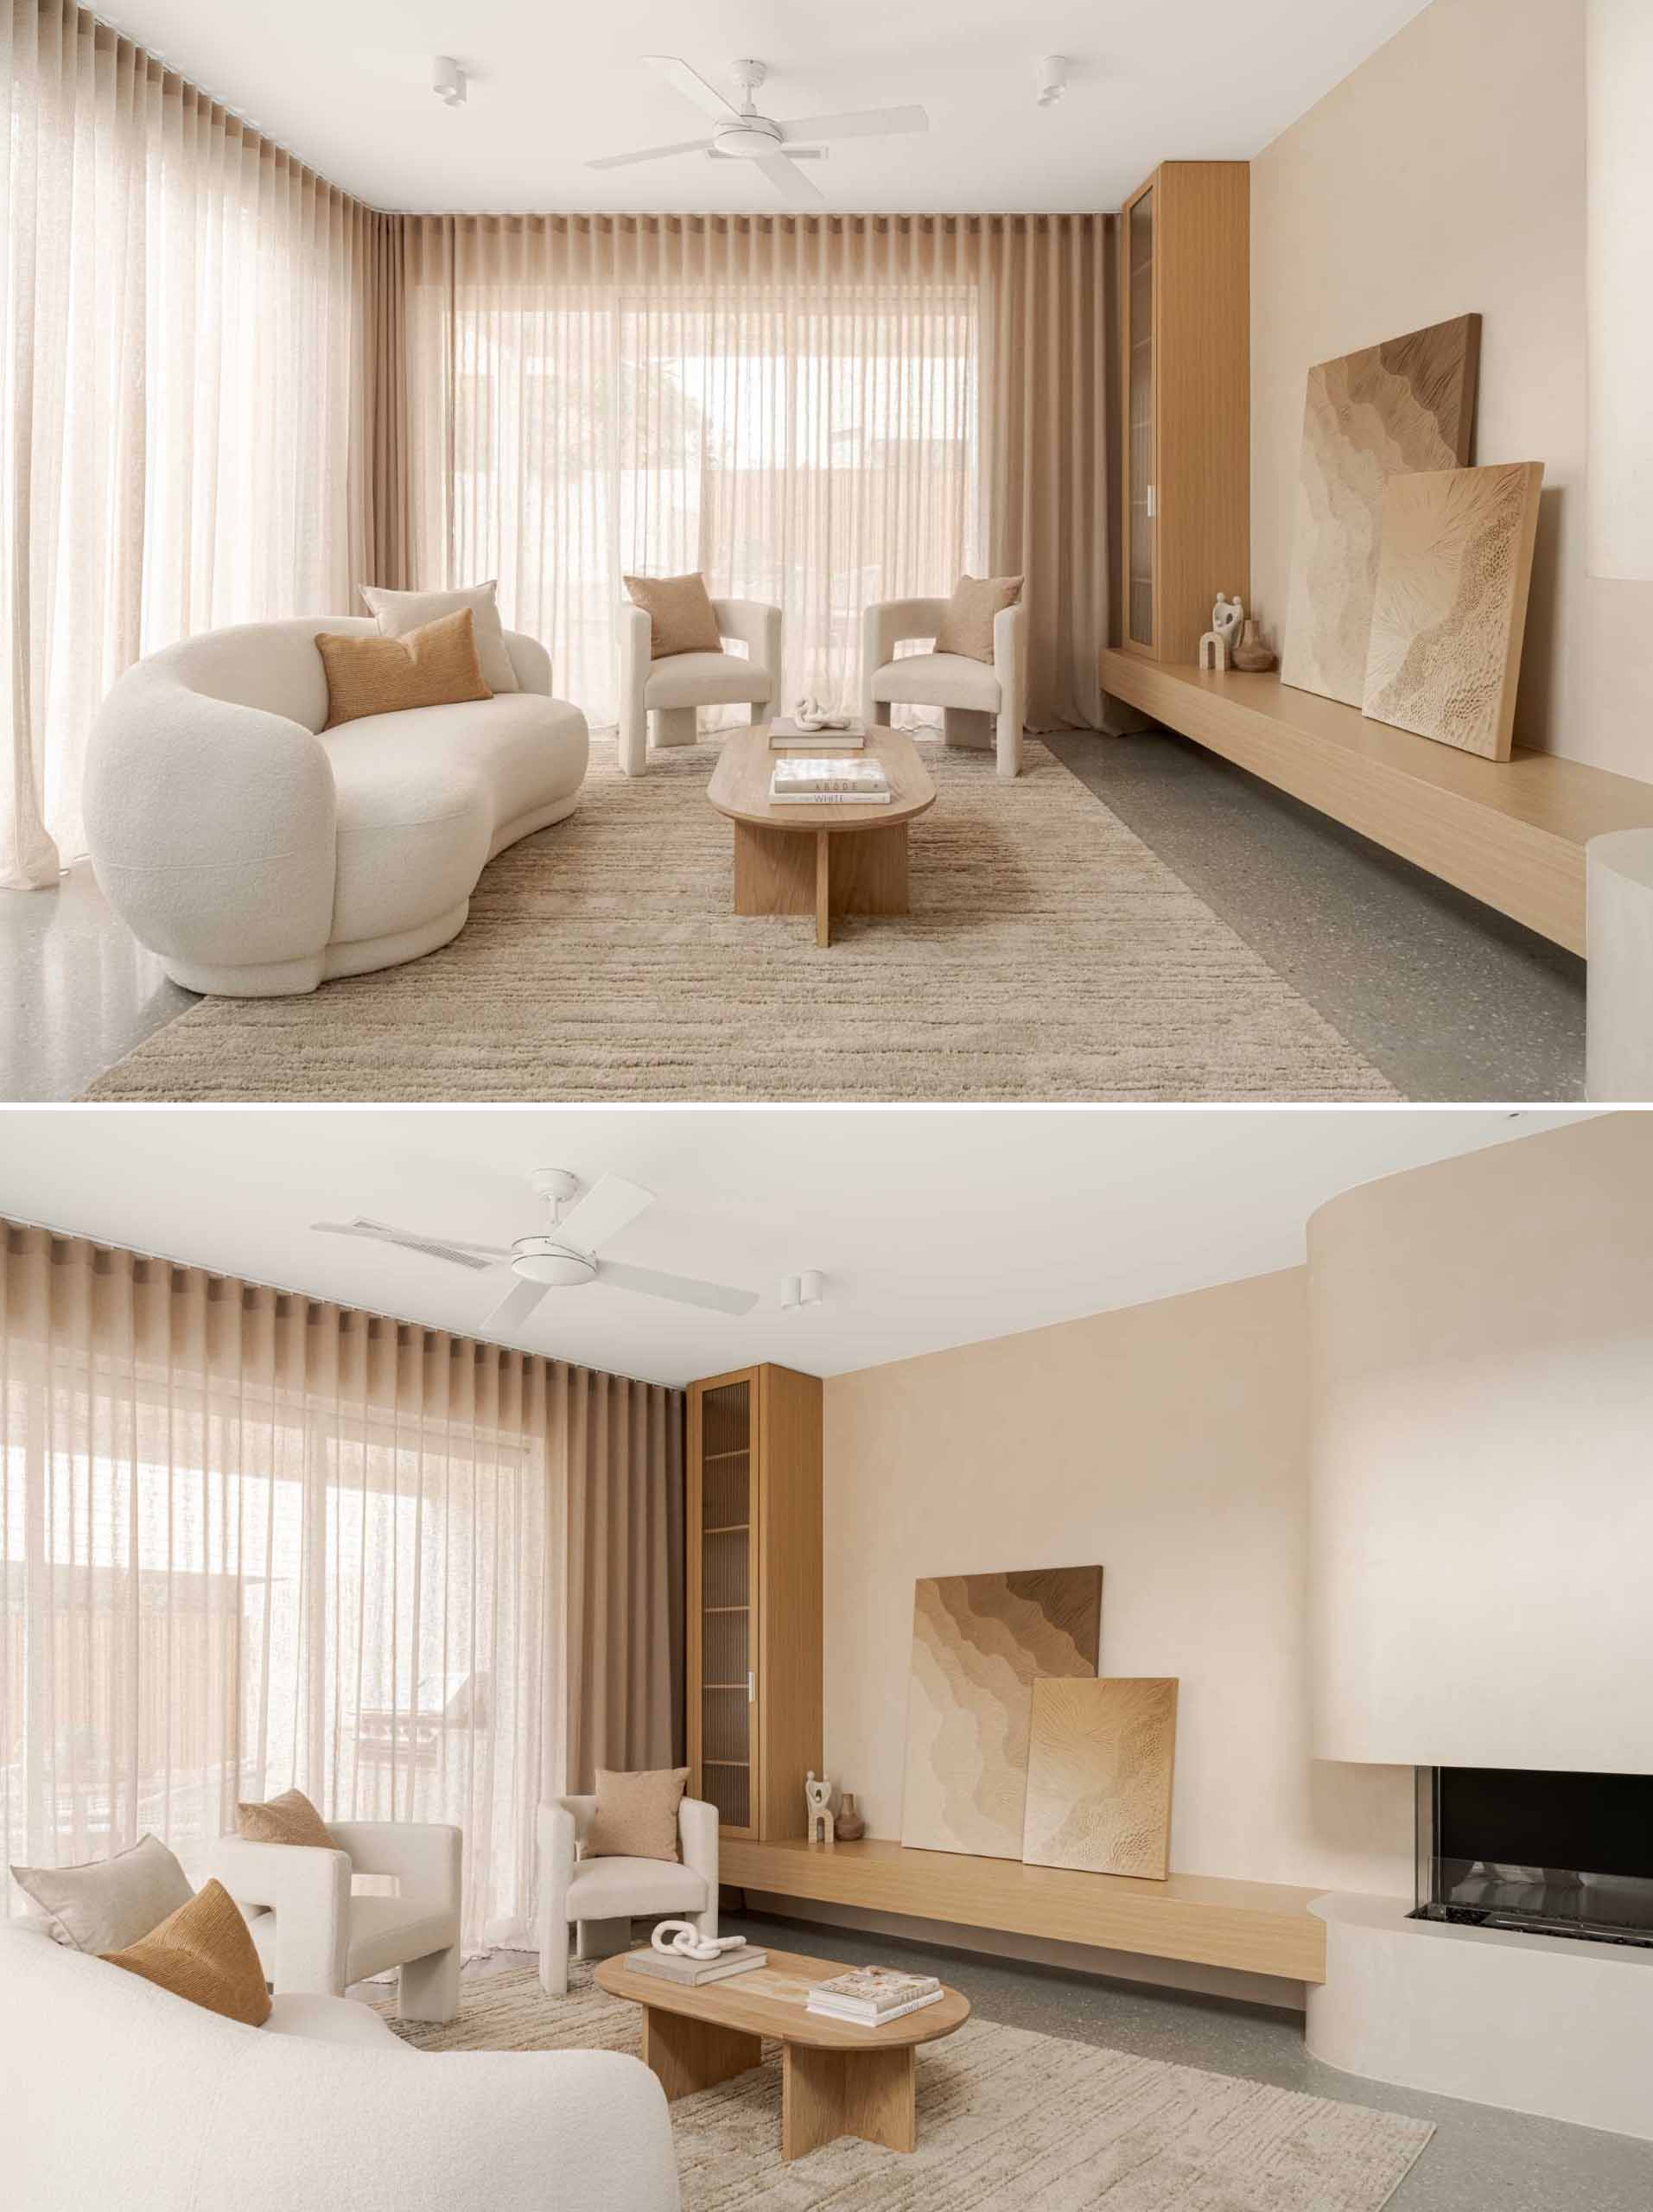 In this living room, calm tones and ،ic curves have combined with natural woods, while floor-to-ceiling curtains add a soft element.